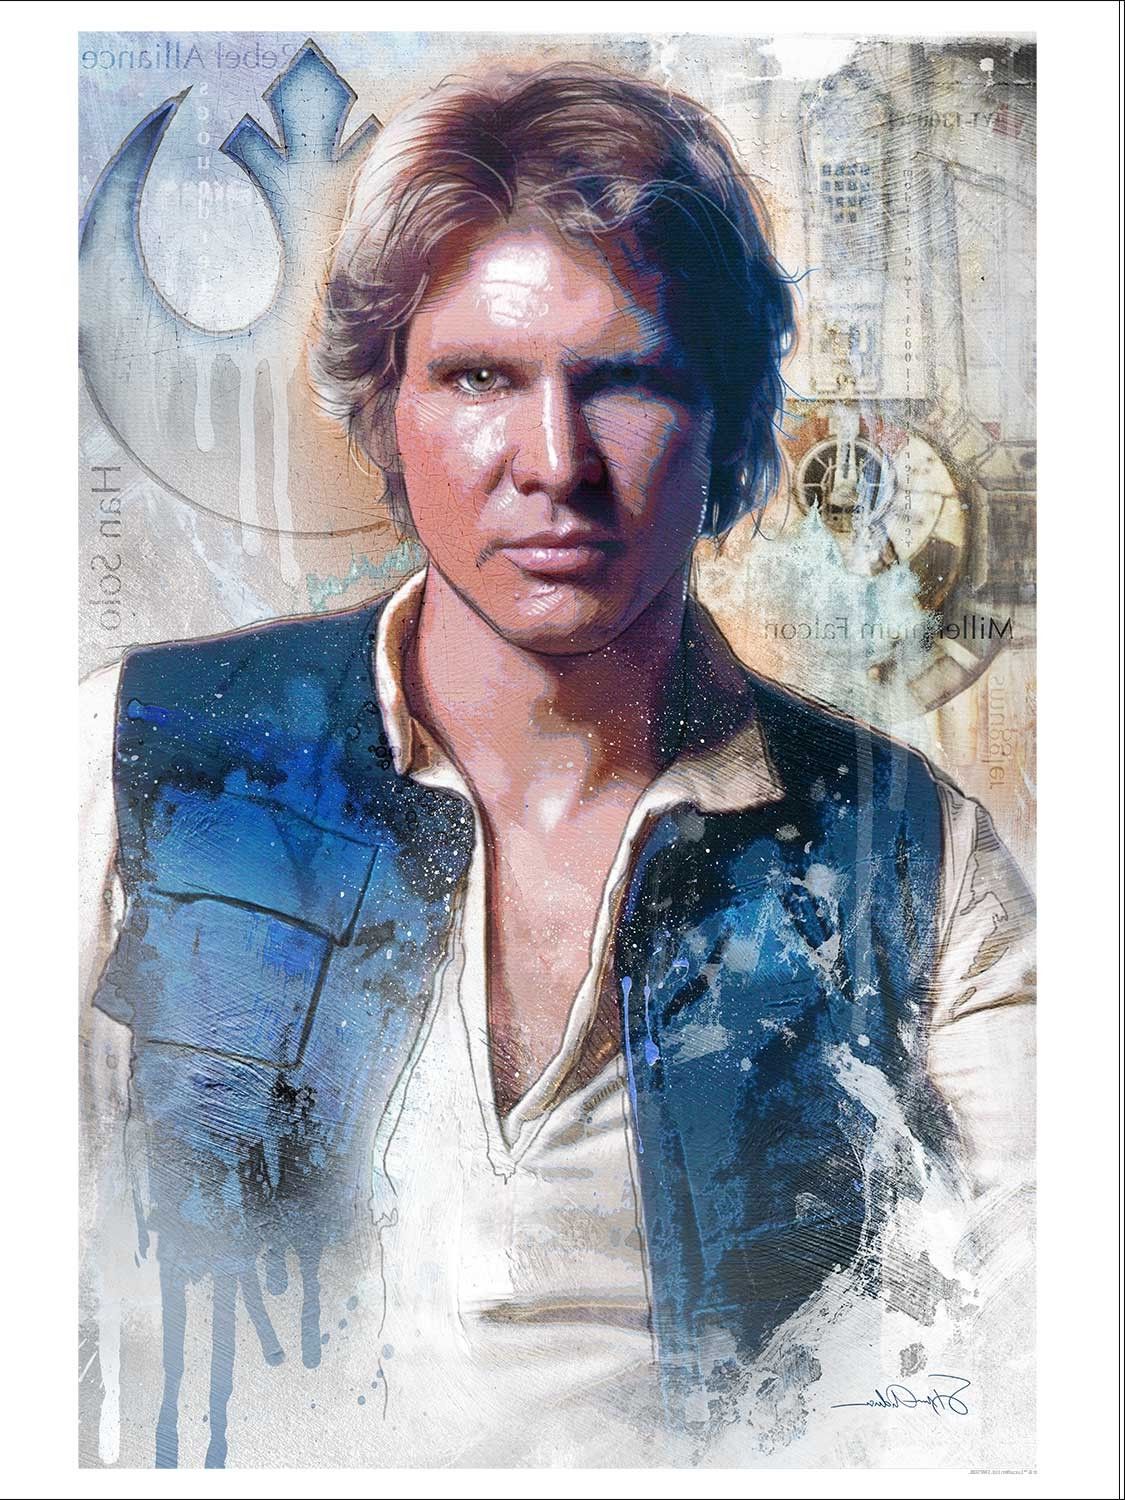 Star Wars, Join The Alliance, Han Solo Wallpaper HD / Desktop and Mobile Background